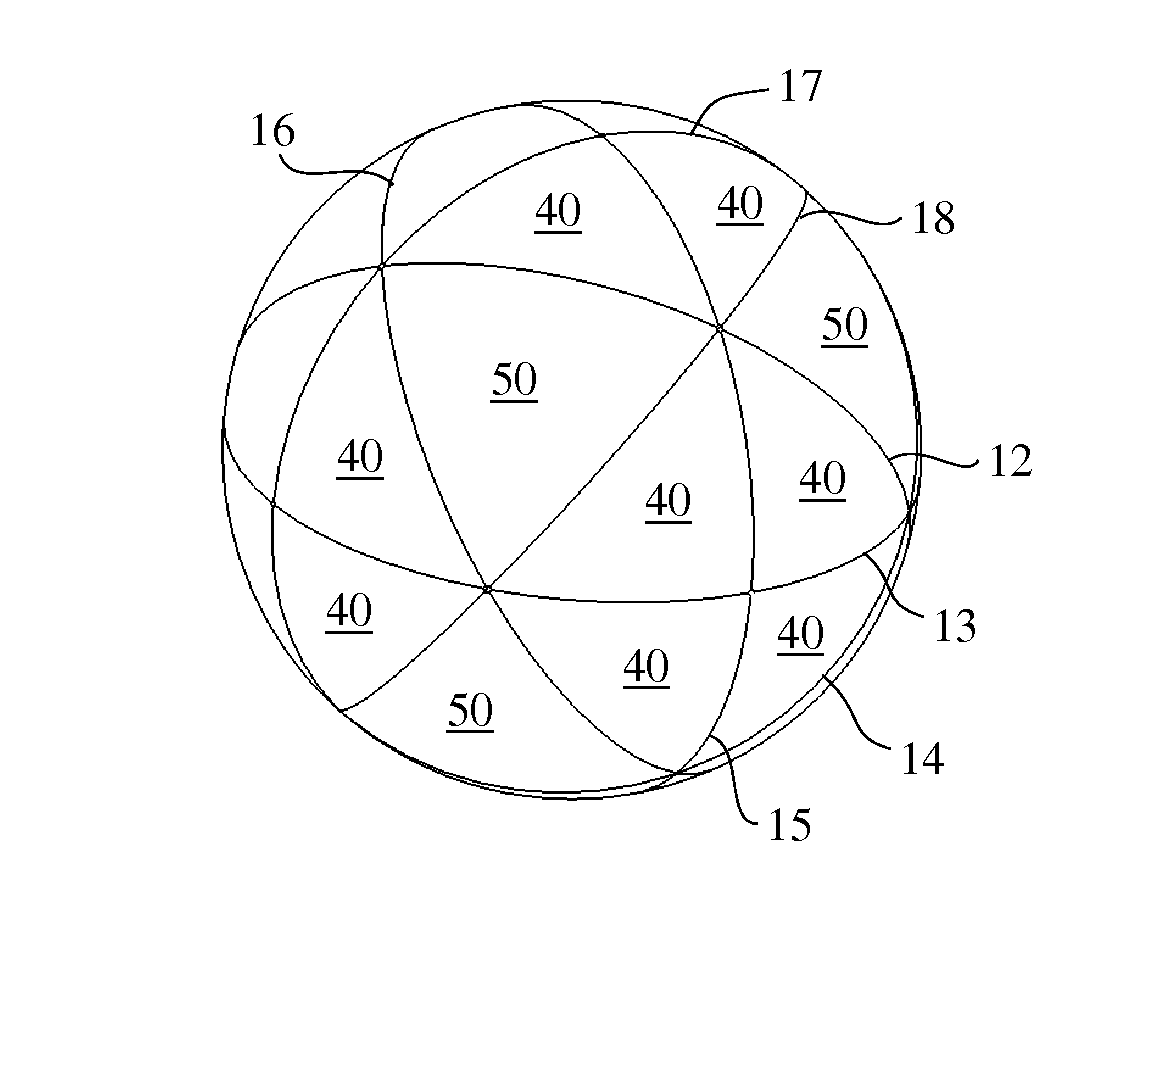 Three-dimensional puzzle with seven axes of rotation